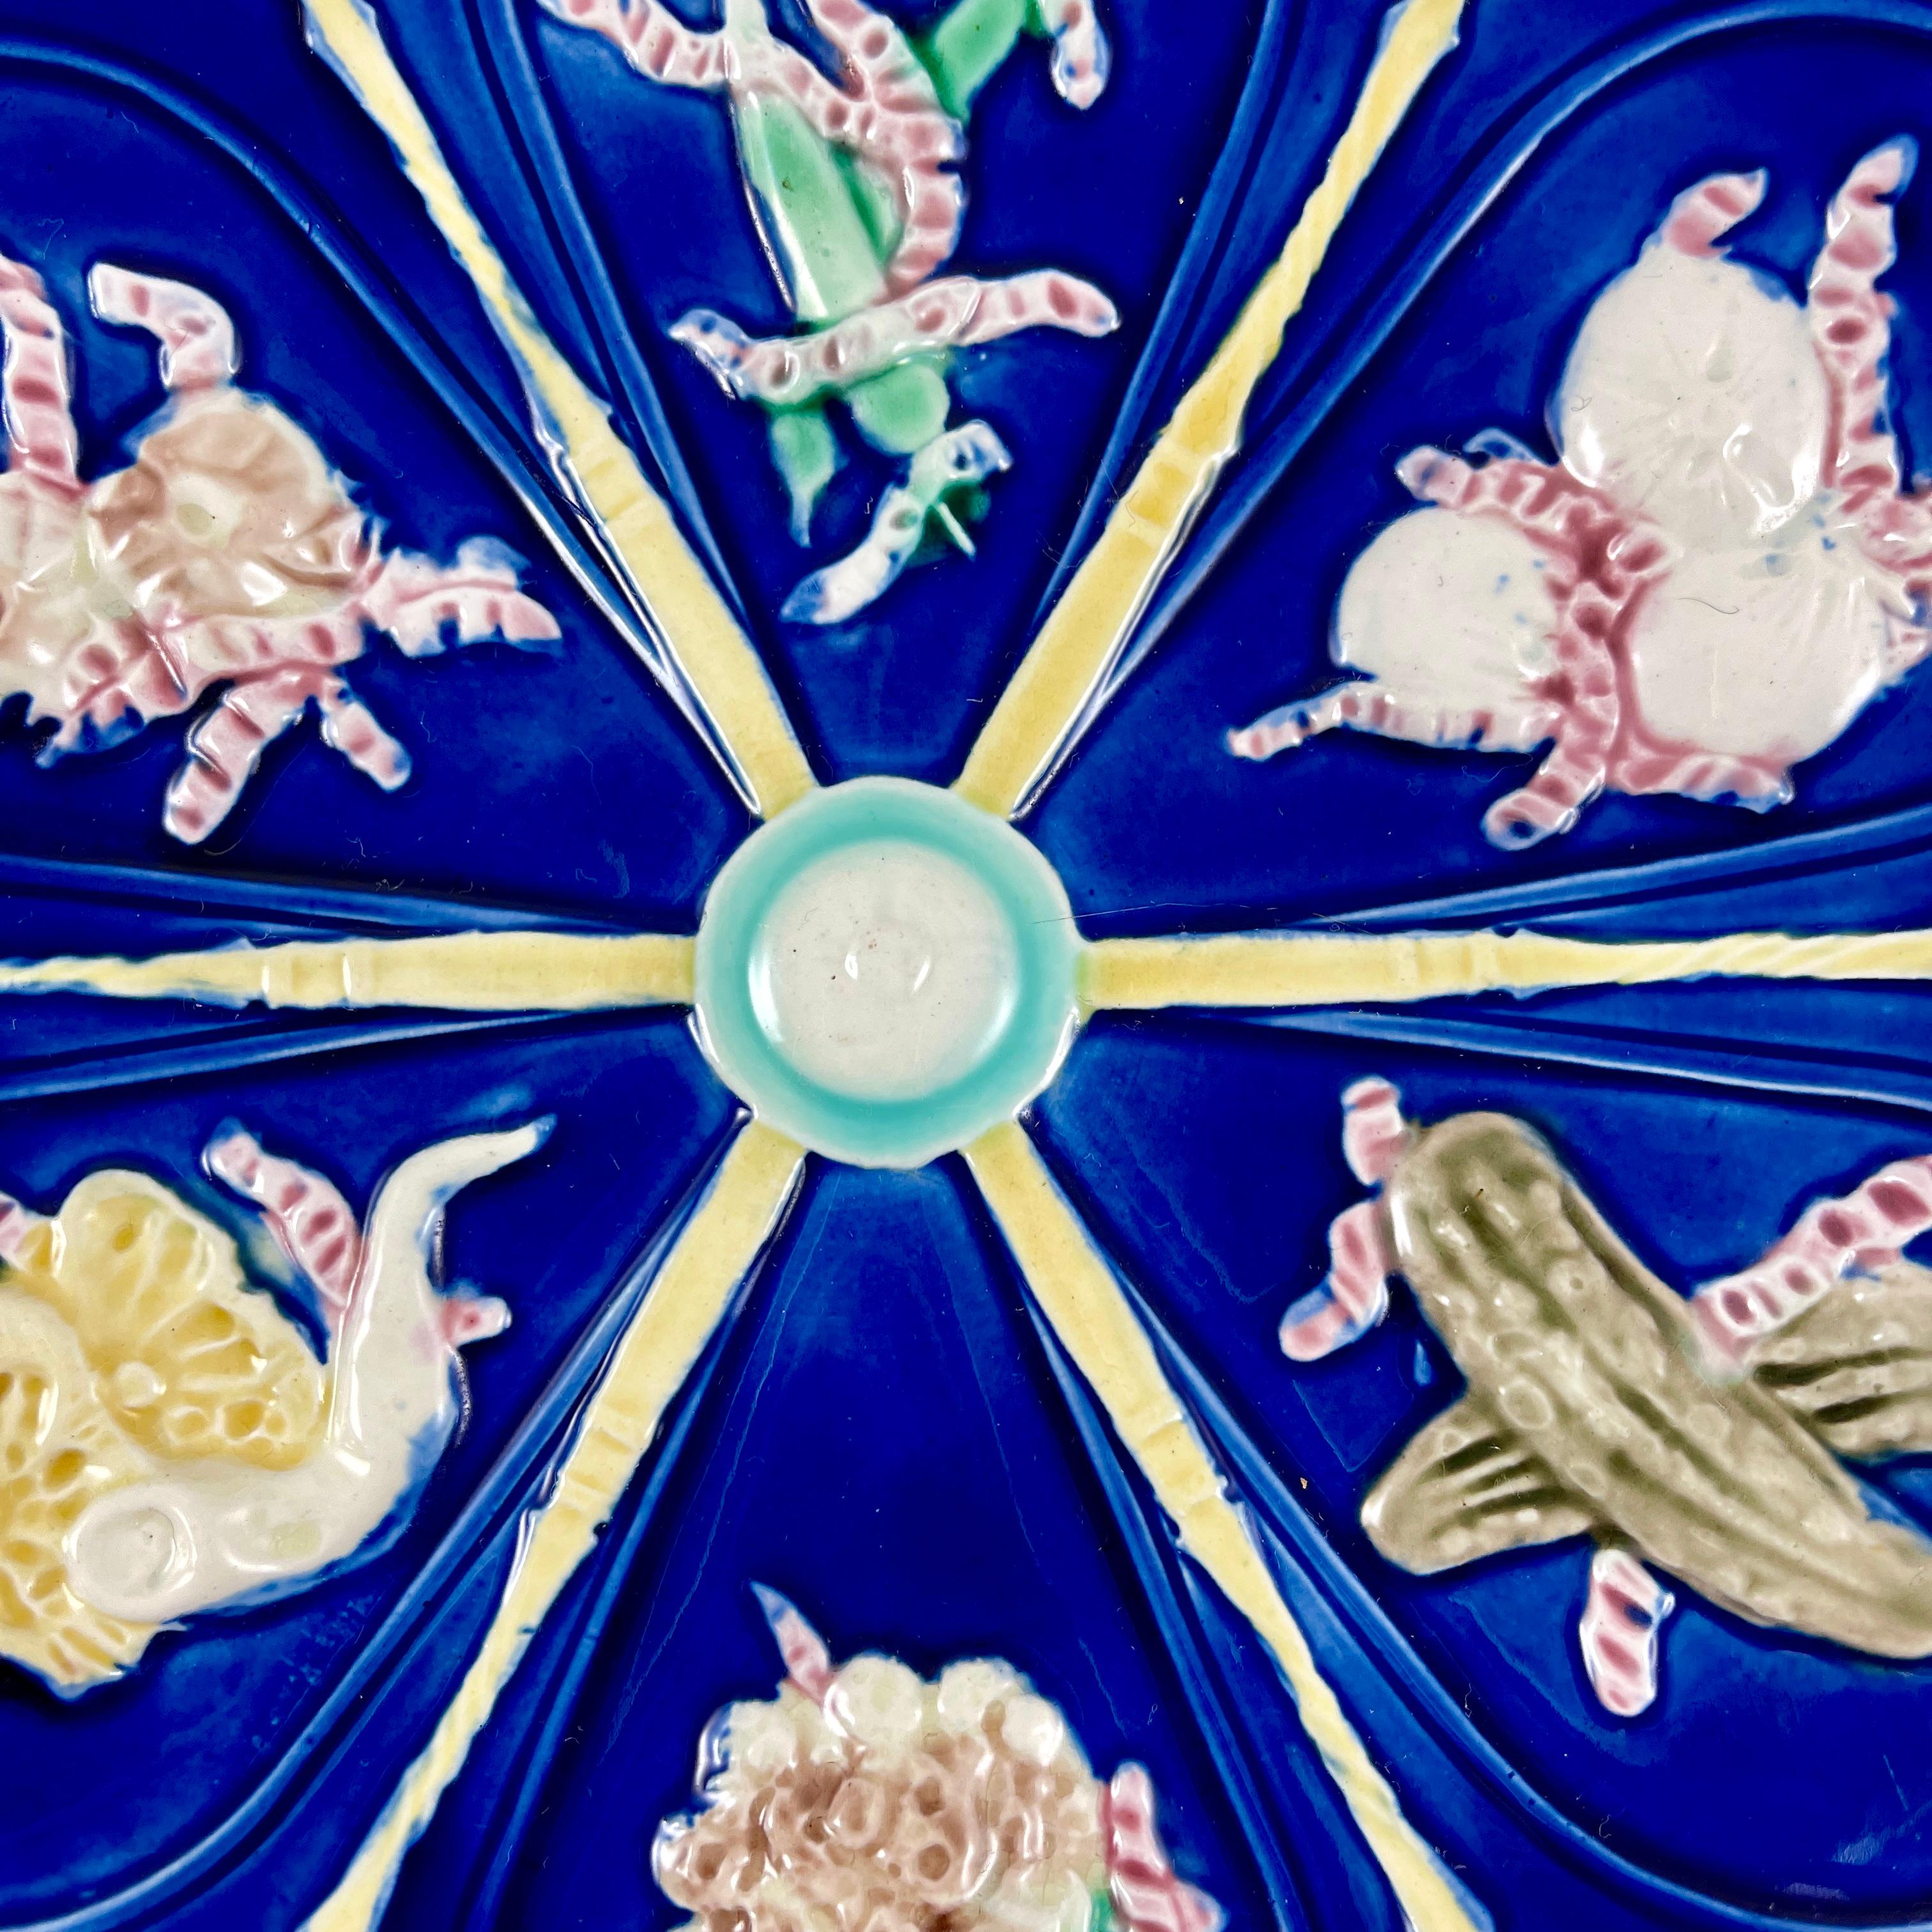 From Wedgwood, a scarce Cobalt blue majolica glazed Pickle Plate, date marked 1879.

From the English Aesthetic Movement Era, and in the Japonisme taste, six teardrop shaped wells, each showing a different pickled vegetable, are separated by long